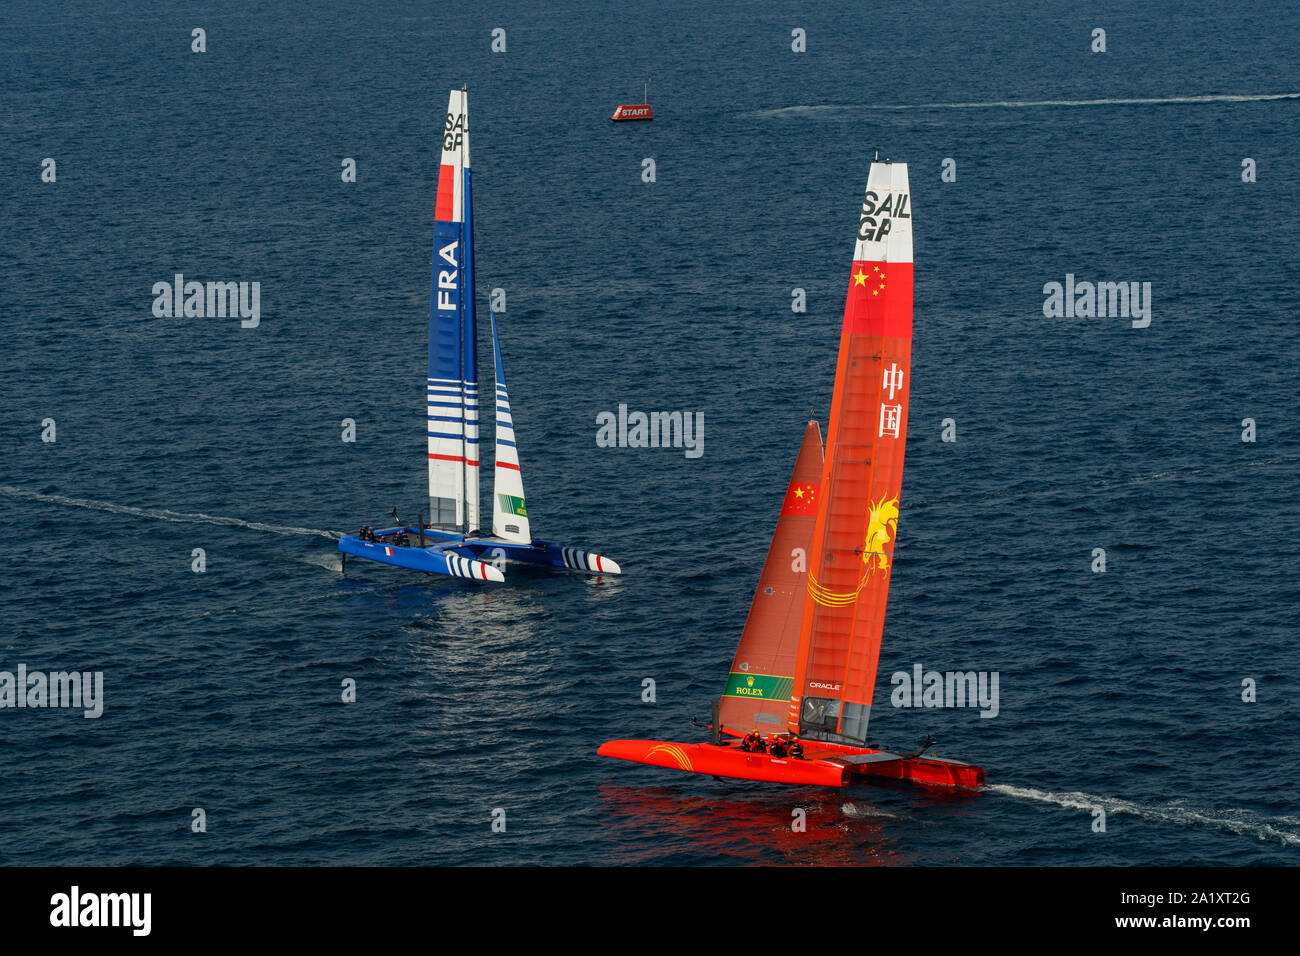 The China SailGP and France SailGP Team F50 catamarans sail during a practice race ahead of the final SailGP event of Season 1 in Marseille, France. 1 Stock Photo